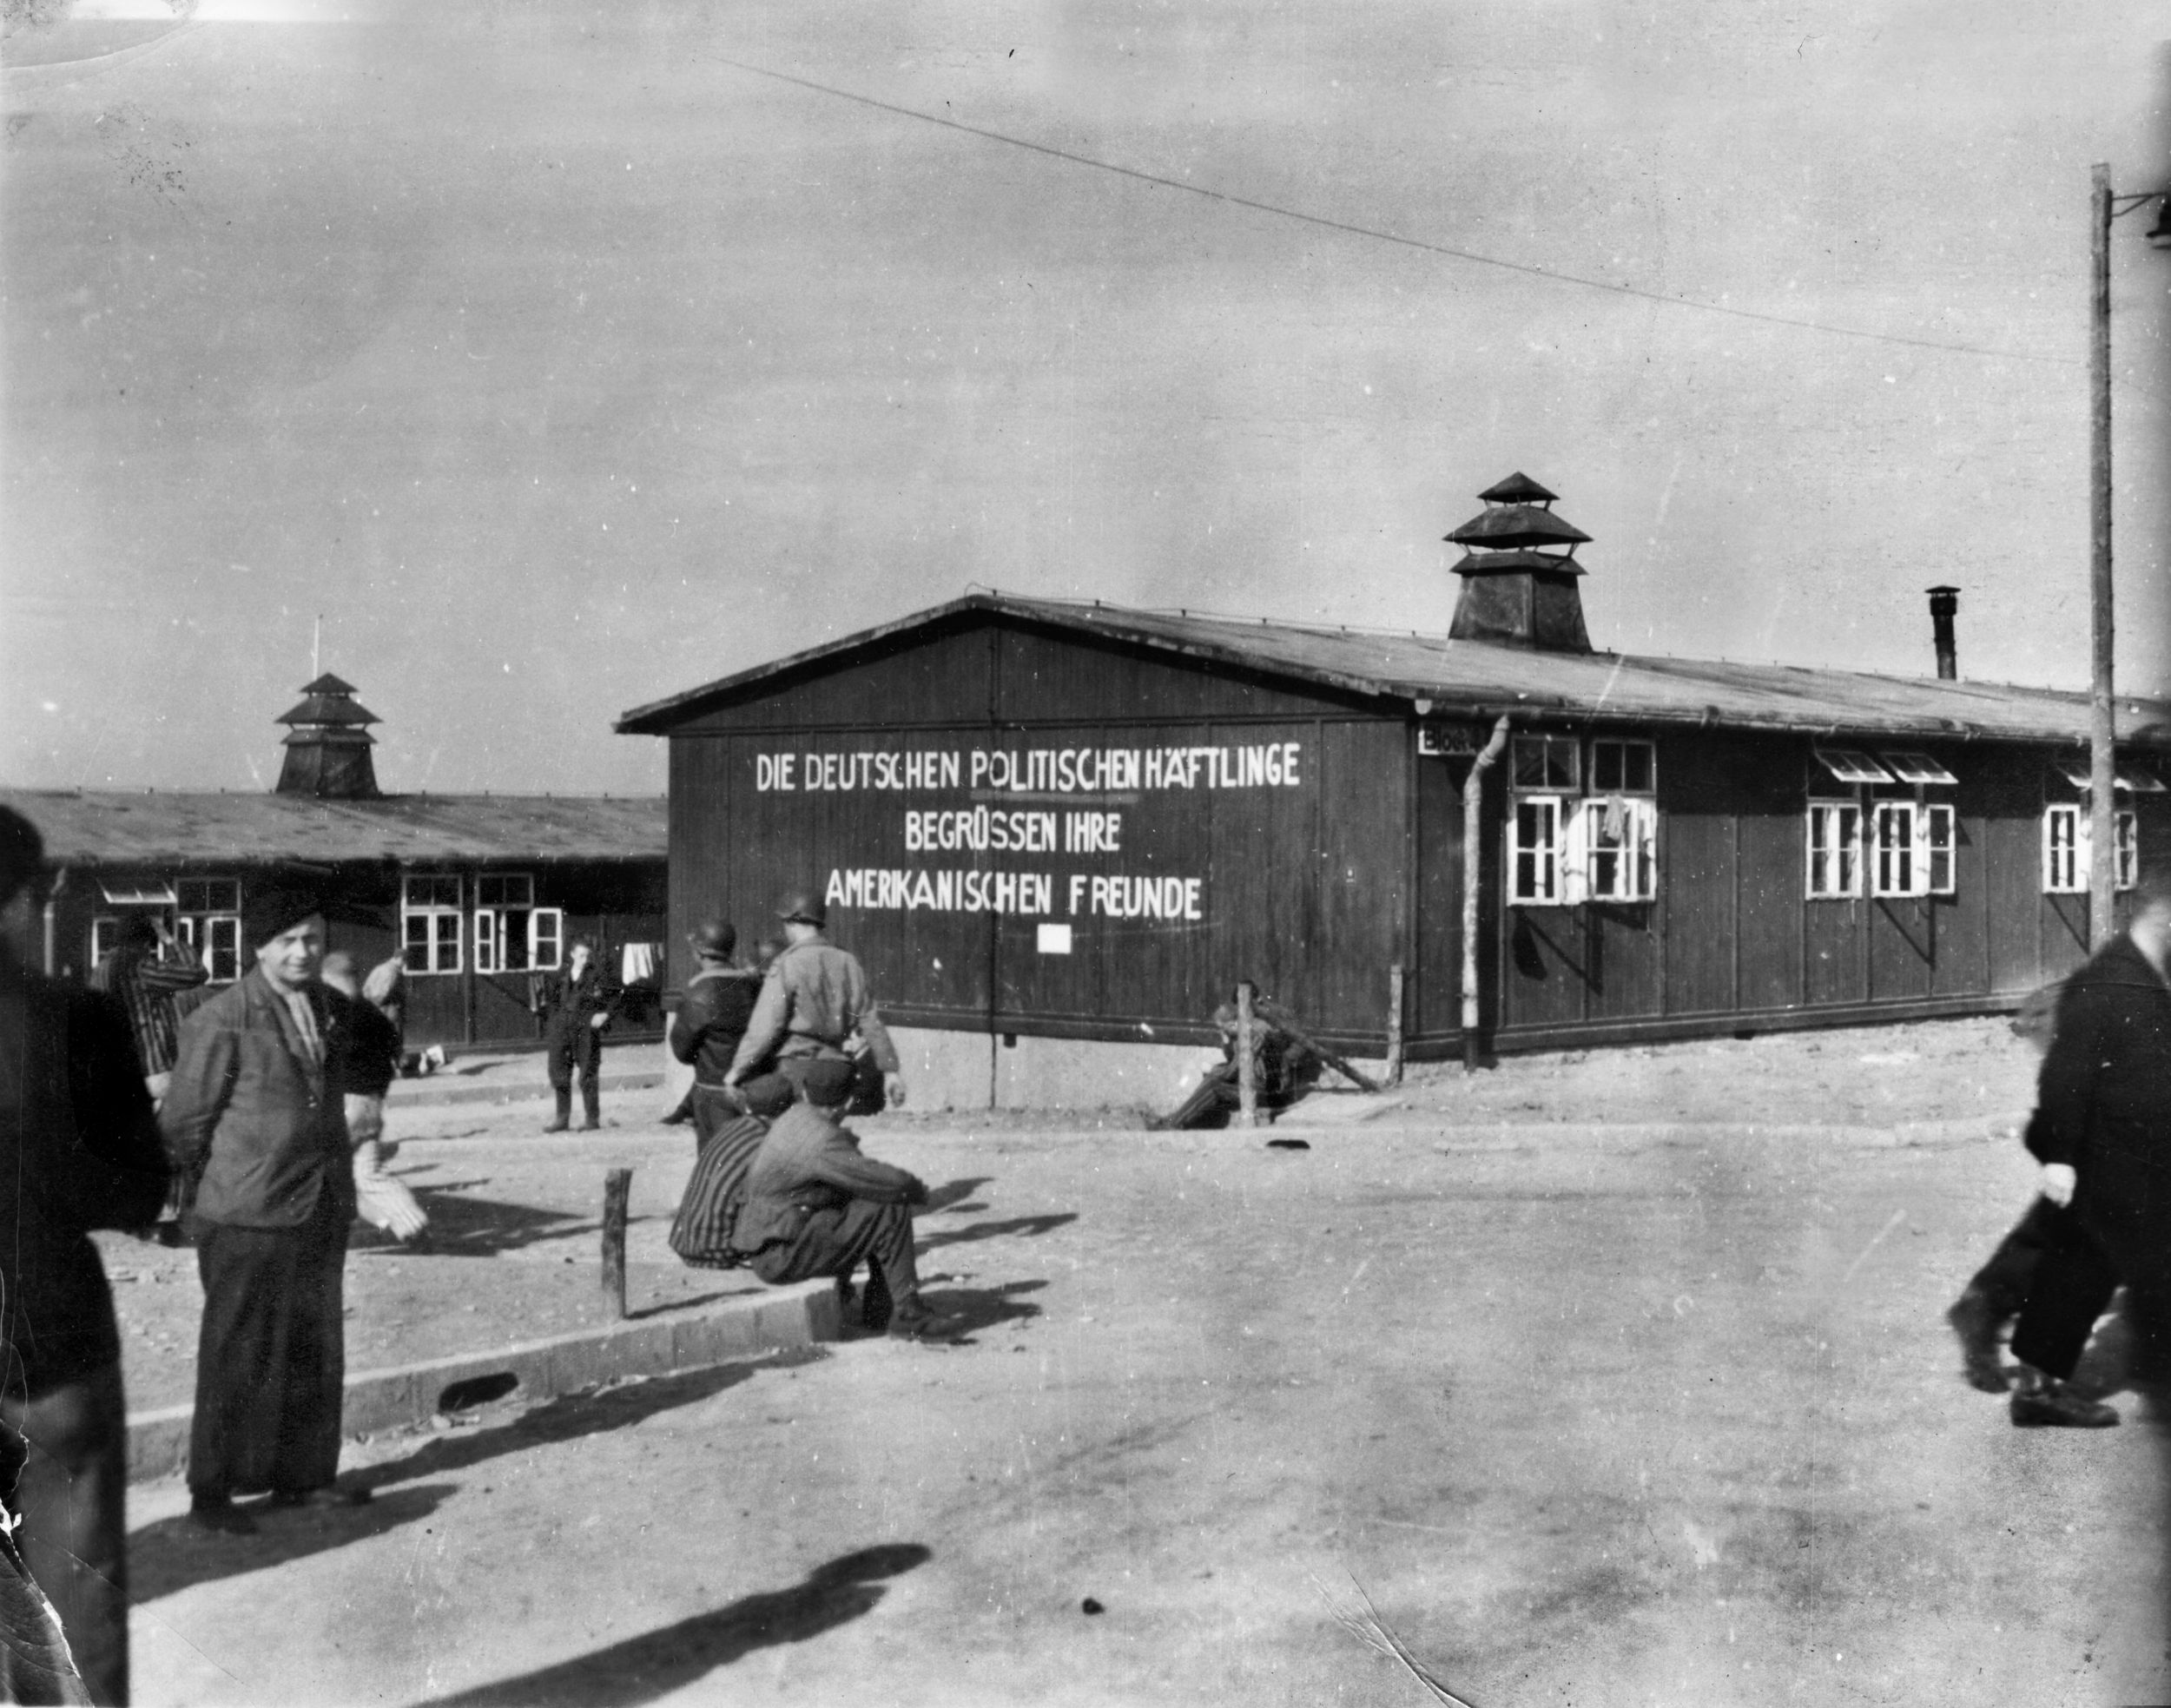  After the first American troops entered the Buchenwald concentration camp near Weimar, Germany, on April 11, 1945, General Eisenhower insisted that as many units as possible visit the camp. Here, two U.S. soldiers walk among liberated prisoners. The sign on the barracks wall reads, “The German Political Prisoners Greet Their American Friends.” 